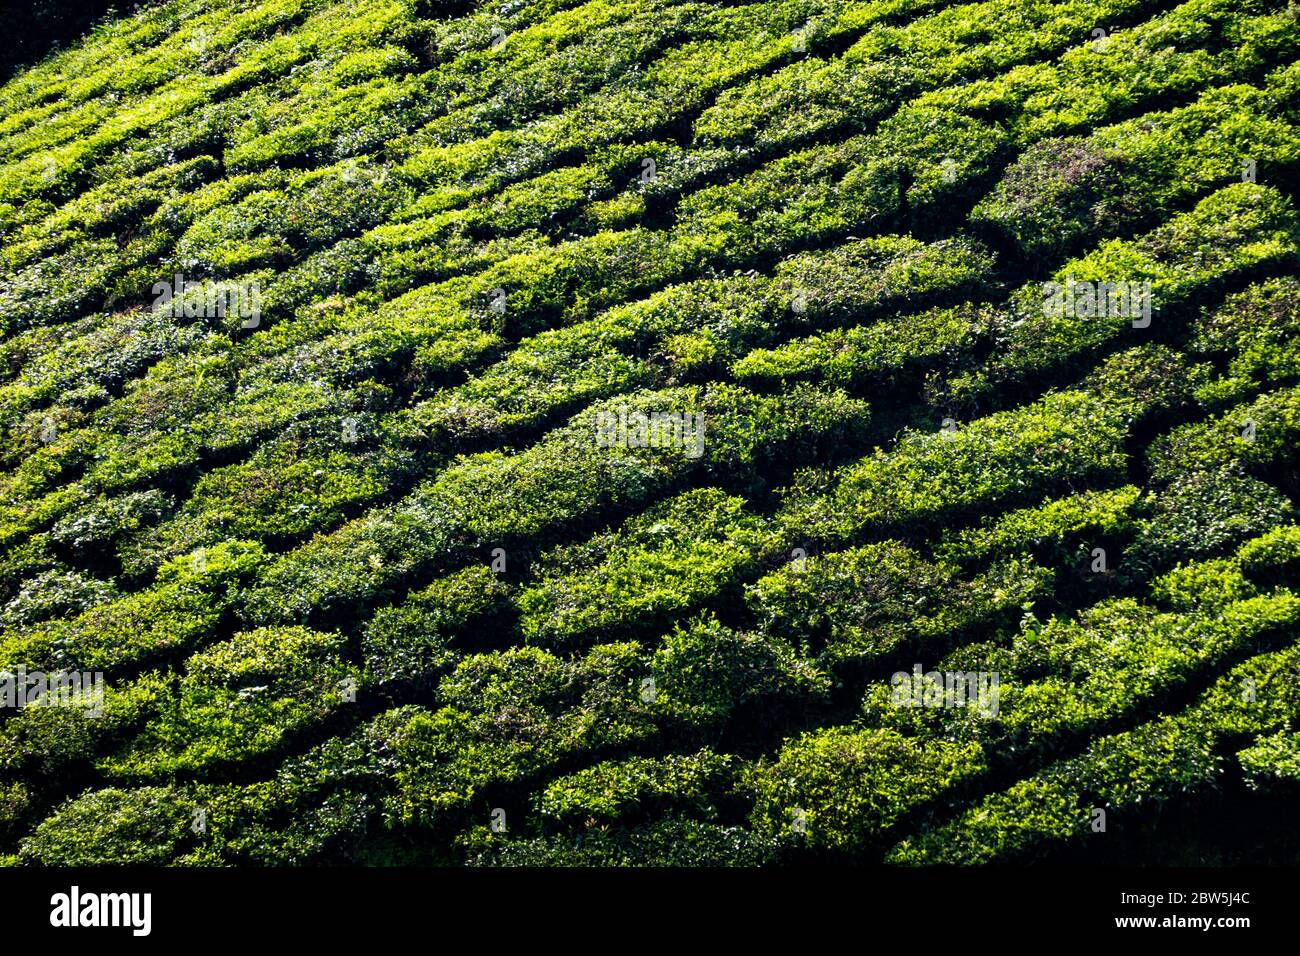 The morning sun and shadows create neat shapes on rows of tea plants in Munnar, India Stock Photo